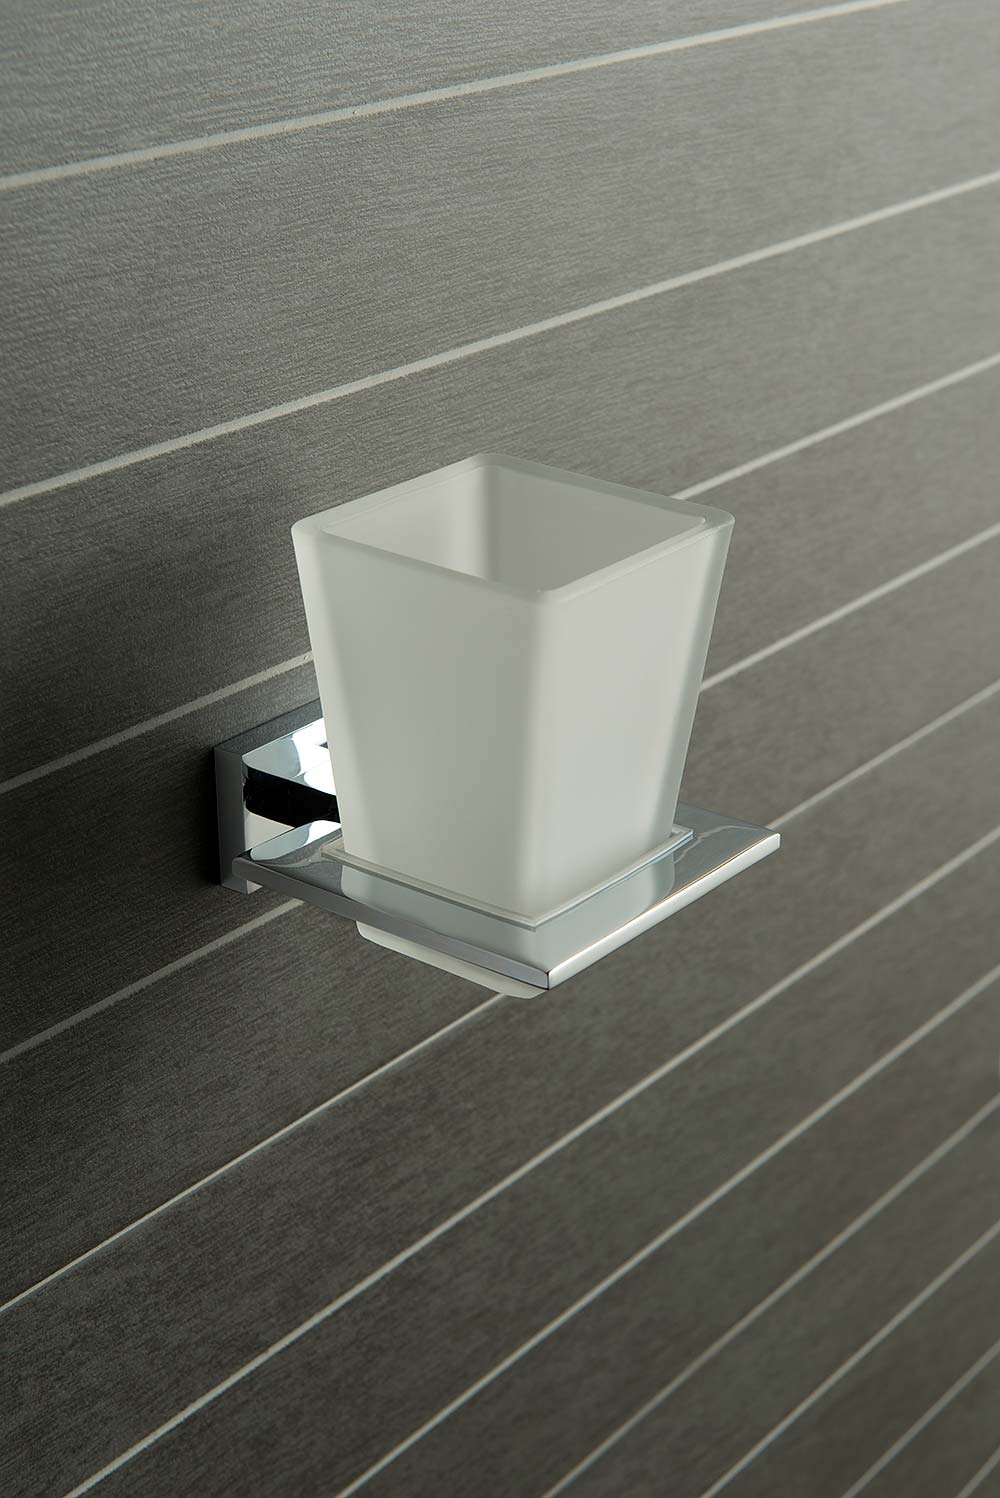 A modern chrome square tumbler and holder on a linear pattern grey tiled wall.